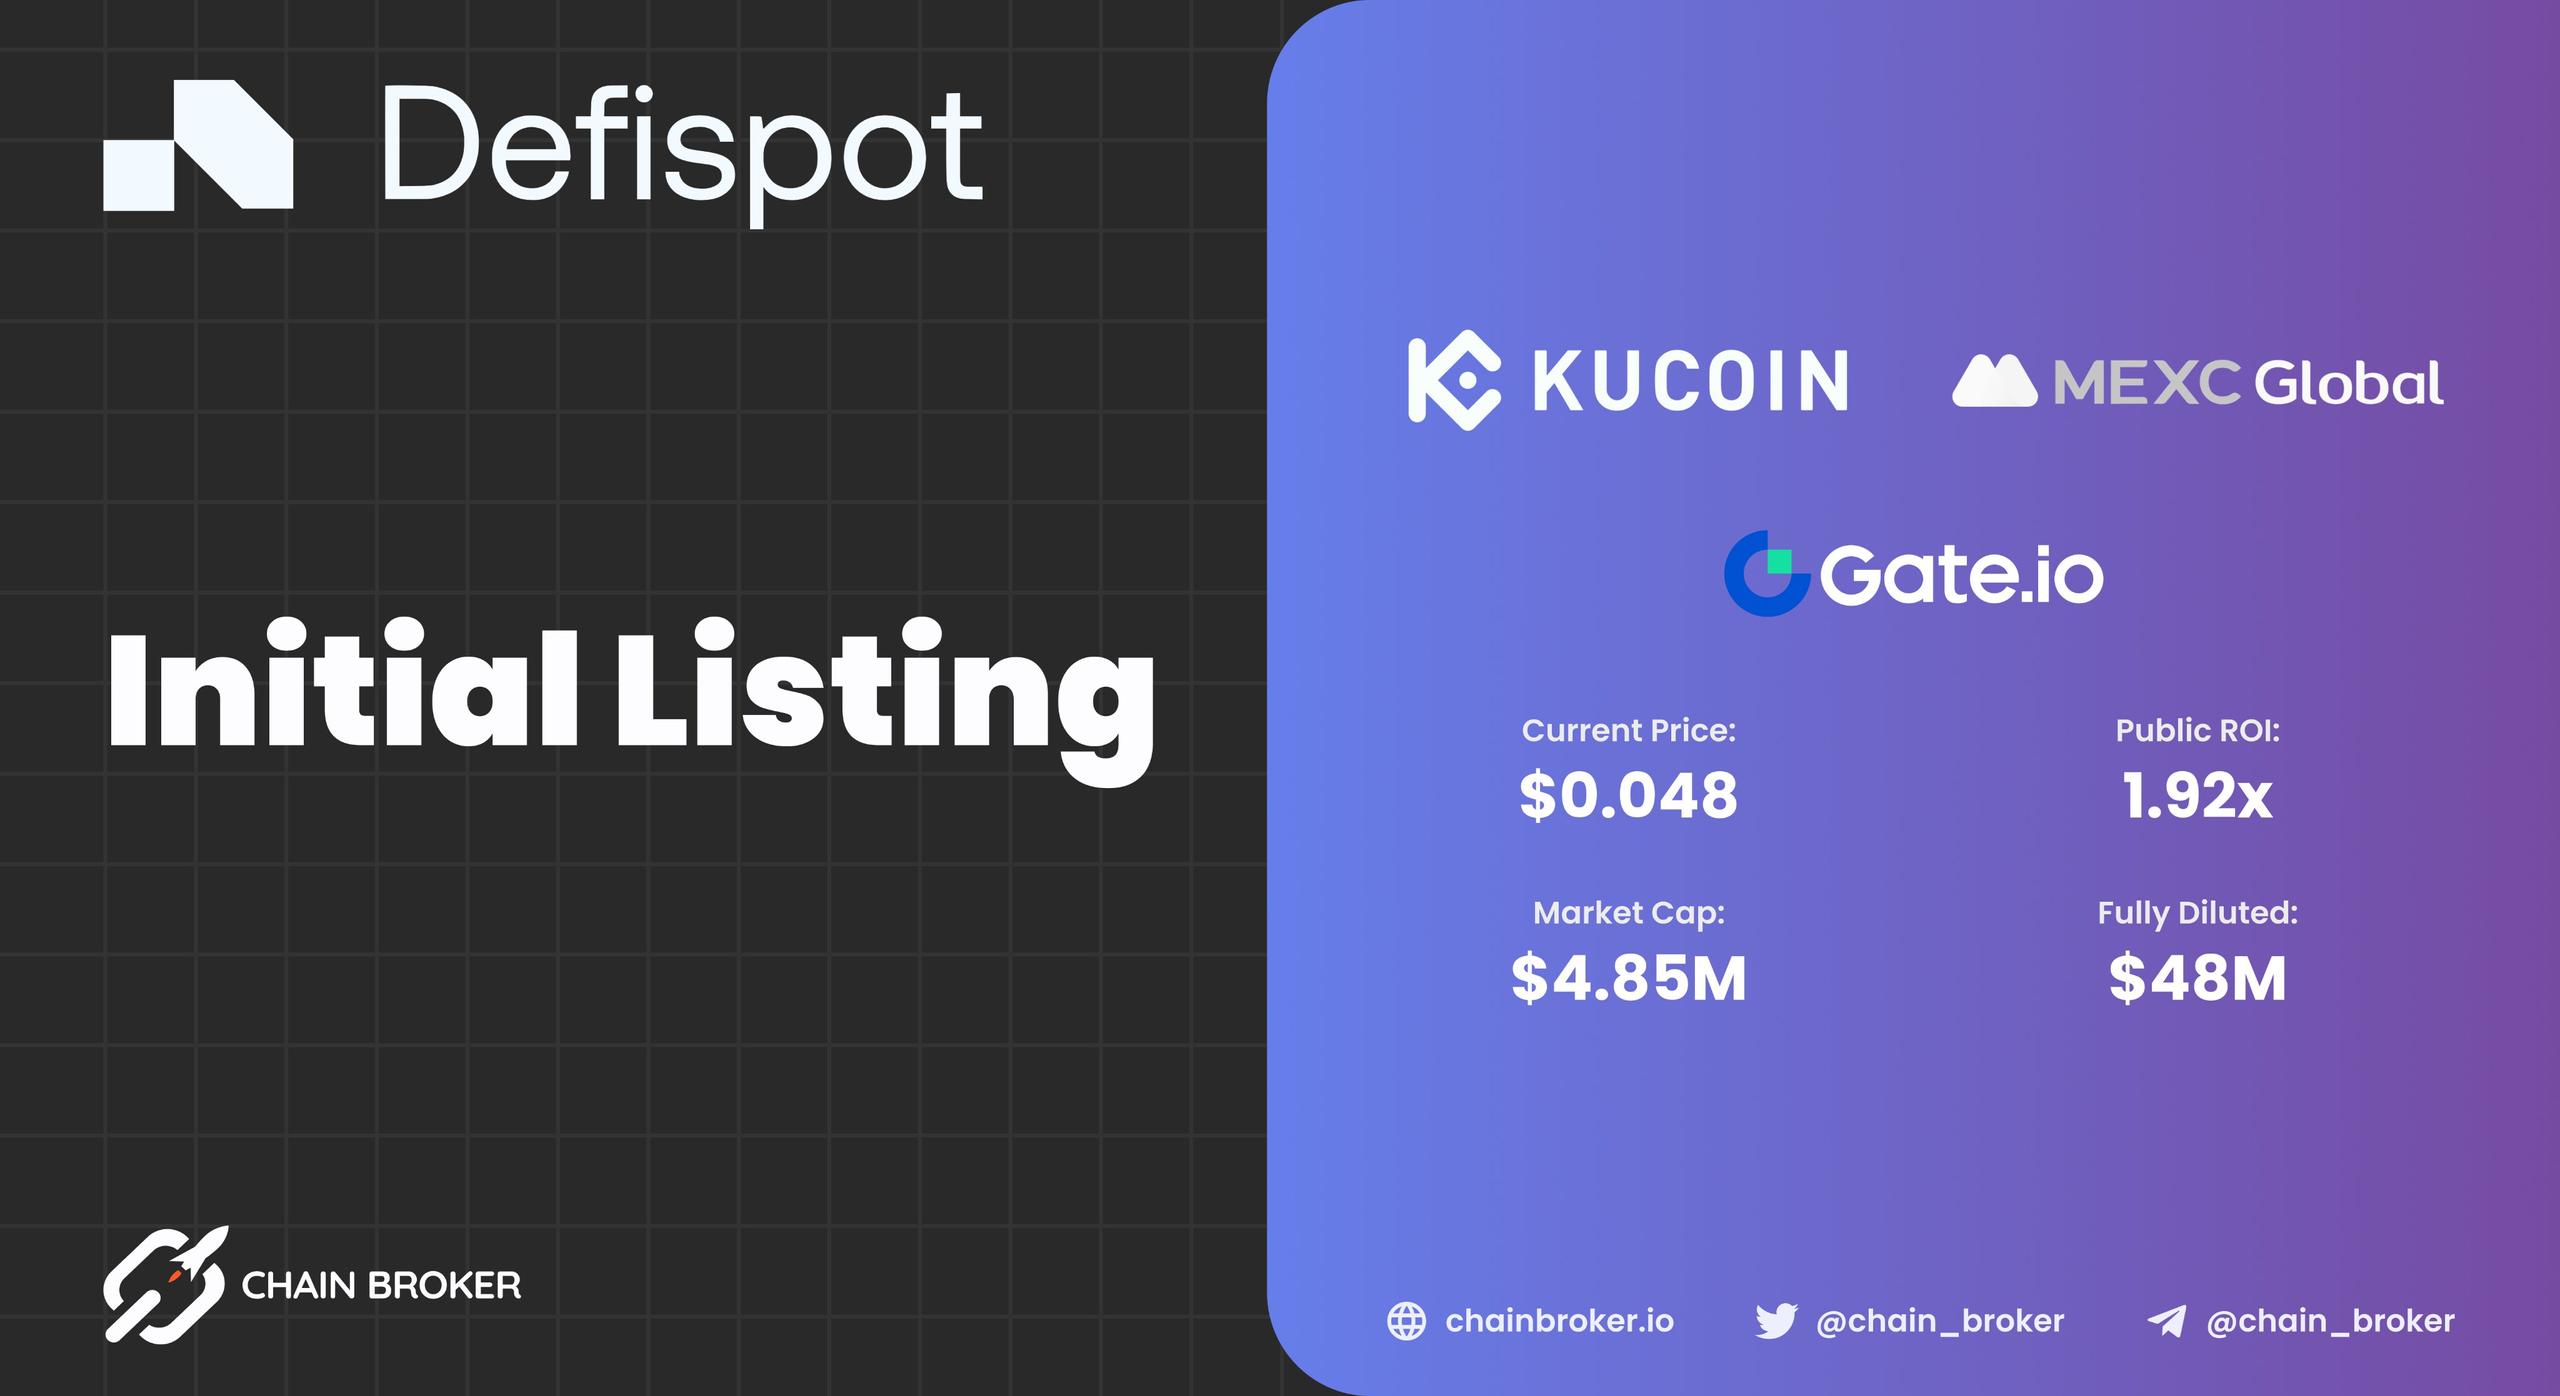 Defispot has been Listed on multiple exchanges.